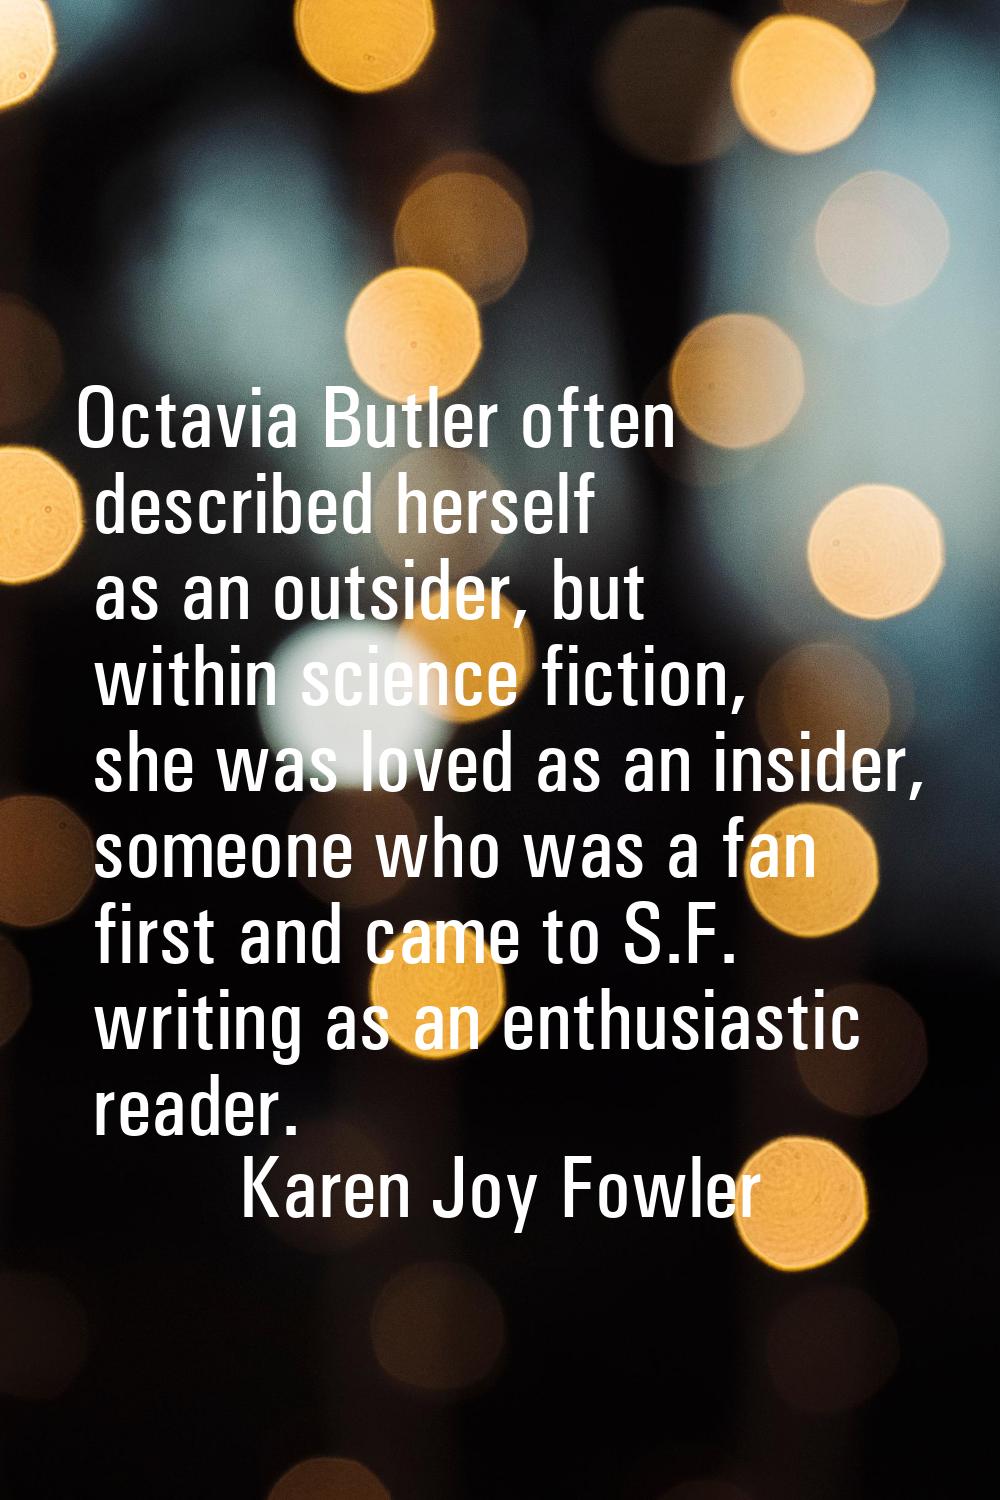 Octavia Butler often described herself as an outsider, but within science fiction, she was loved as